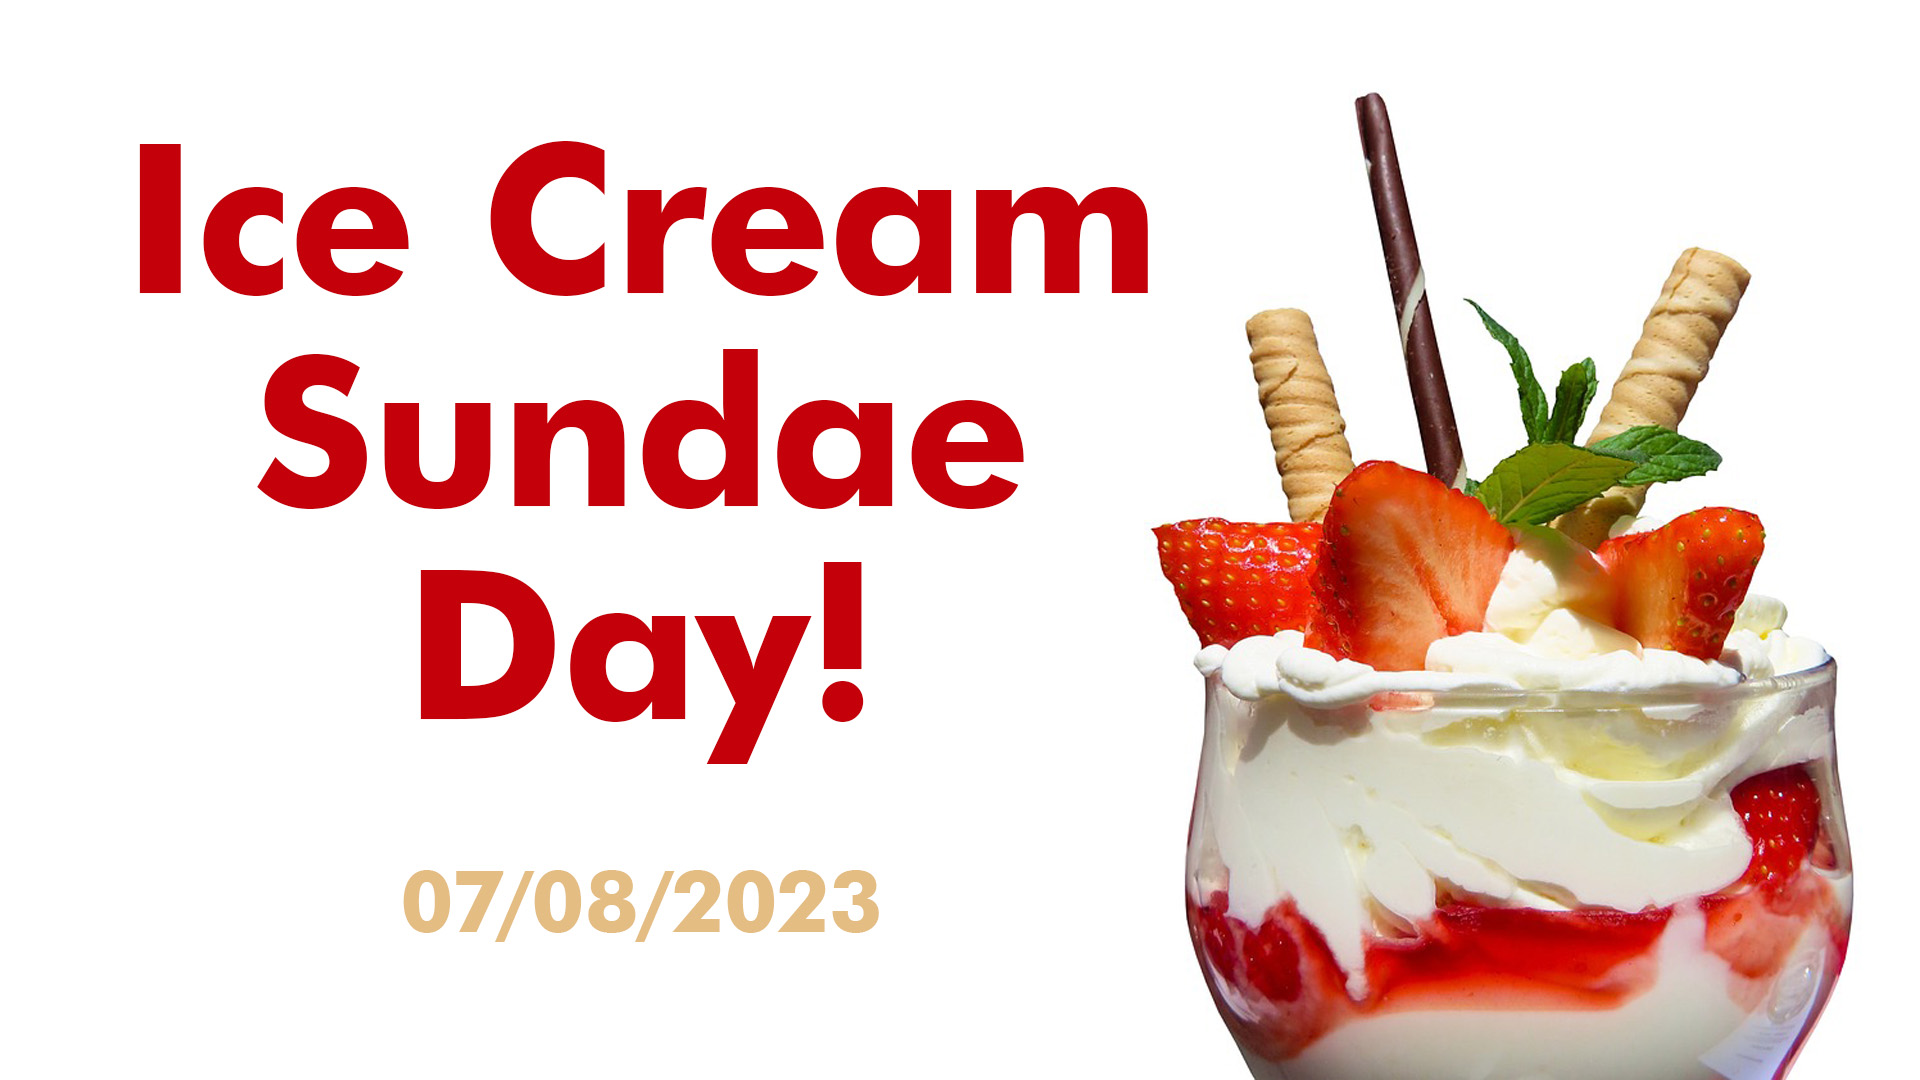 White background with a cut out image of a strawberry ice cream sundae in a glass. There are extra toppings of strawberries, and rolled wafers. On the left side of the graphic there is Ice Cream Sundae Day written out in bold red letters. Underneath that there is the date written in a light tan font 07/08/2023.